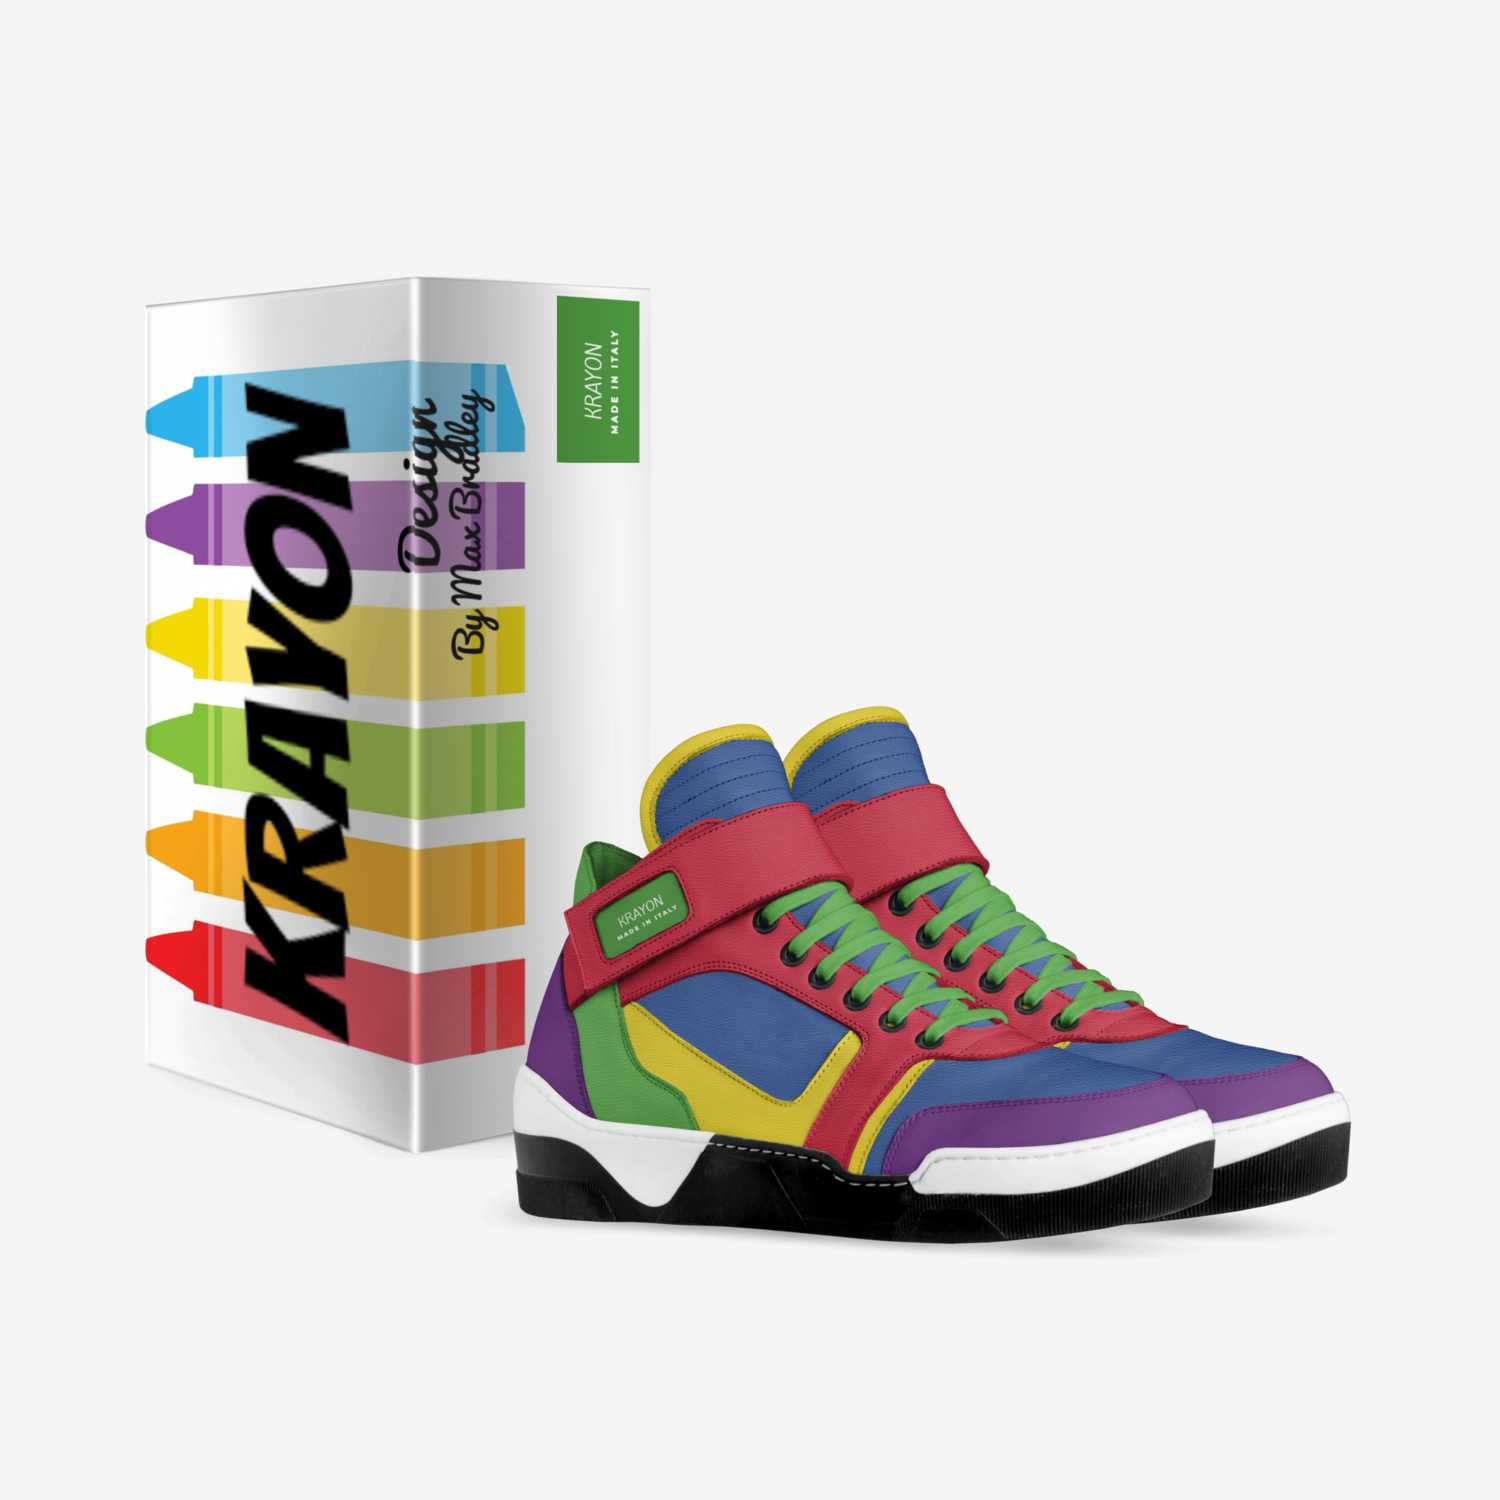 KRAYON custom made in Italy shoes by Max Bradley | Box view